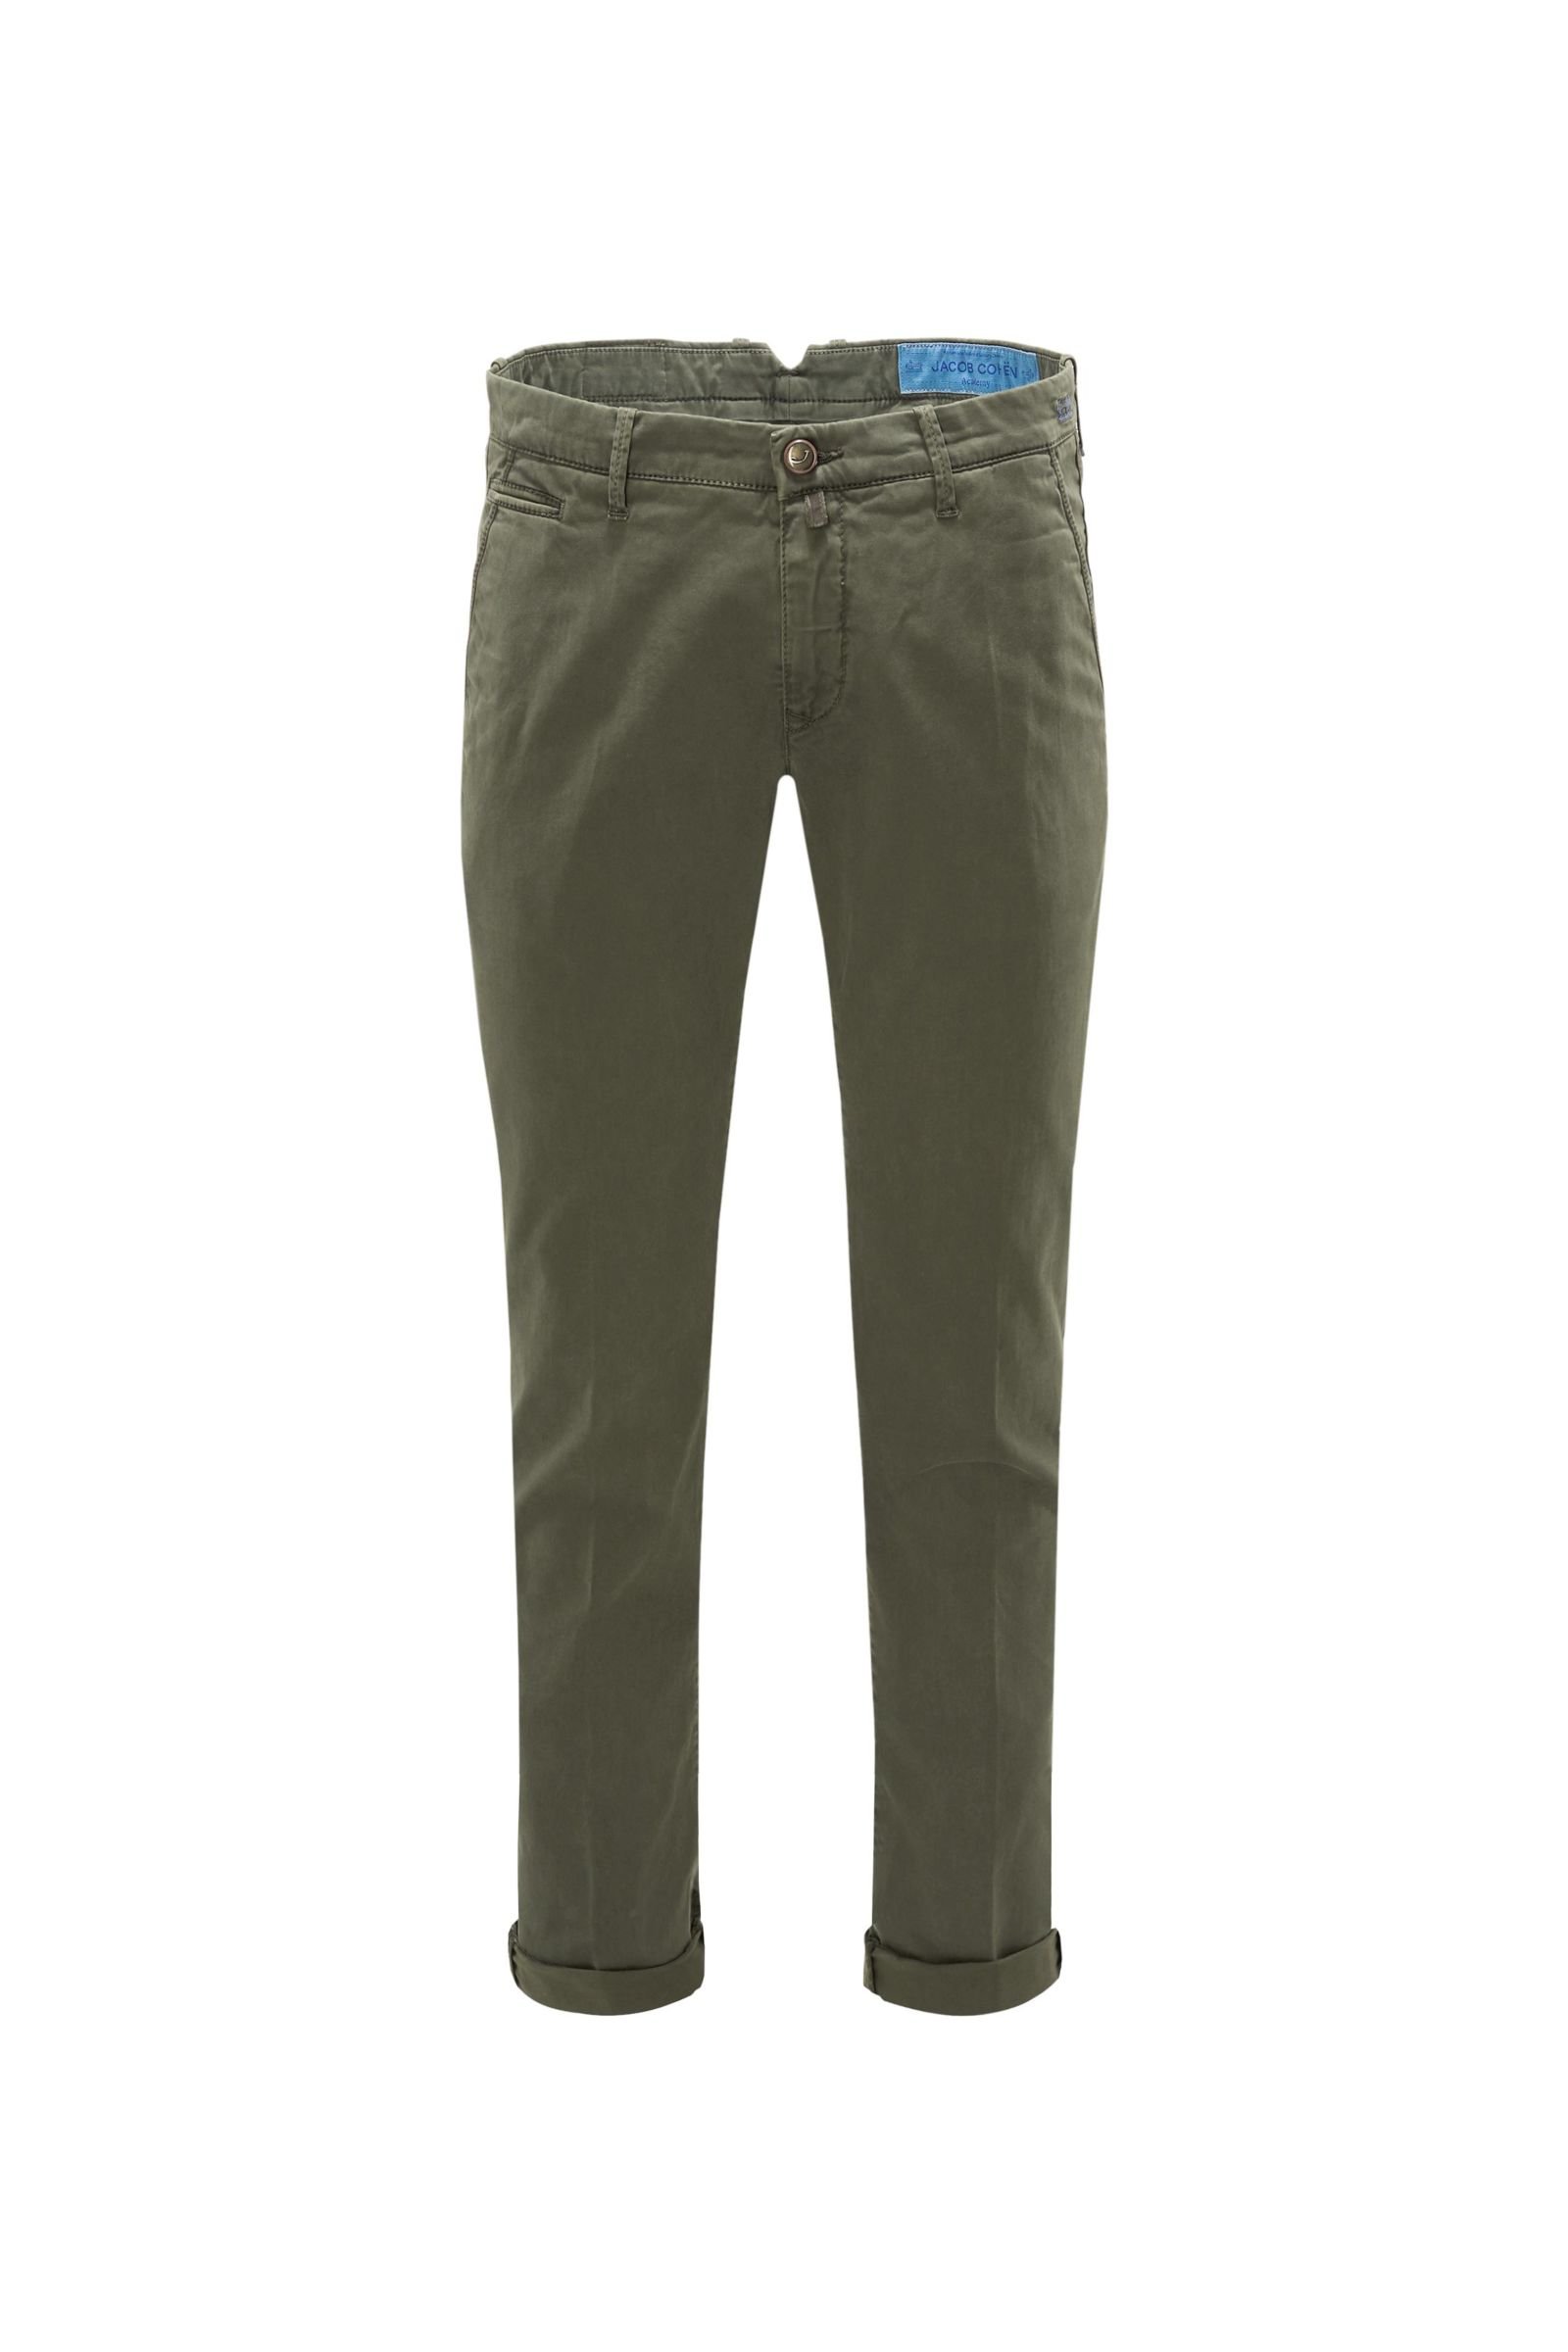 Cotton trousers 'B Comfort Slim Fit' olive